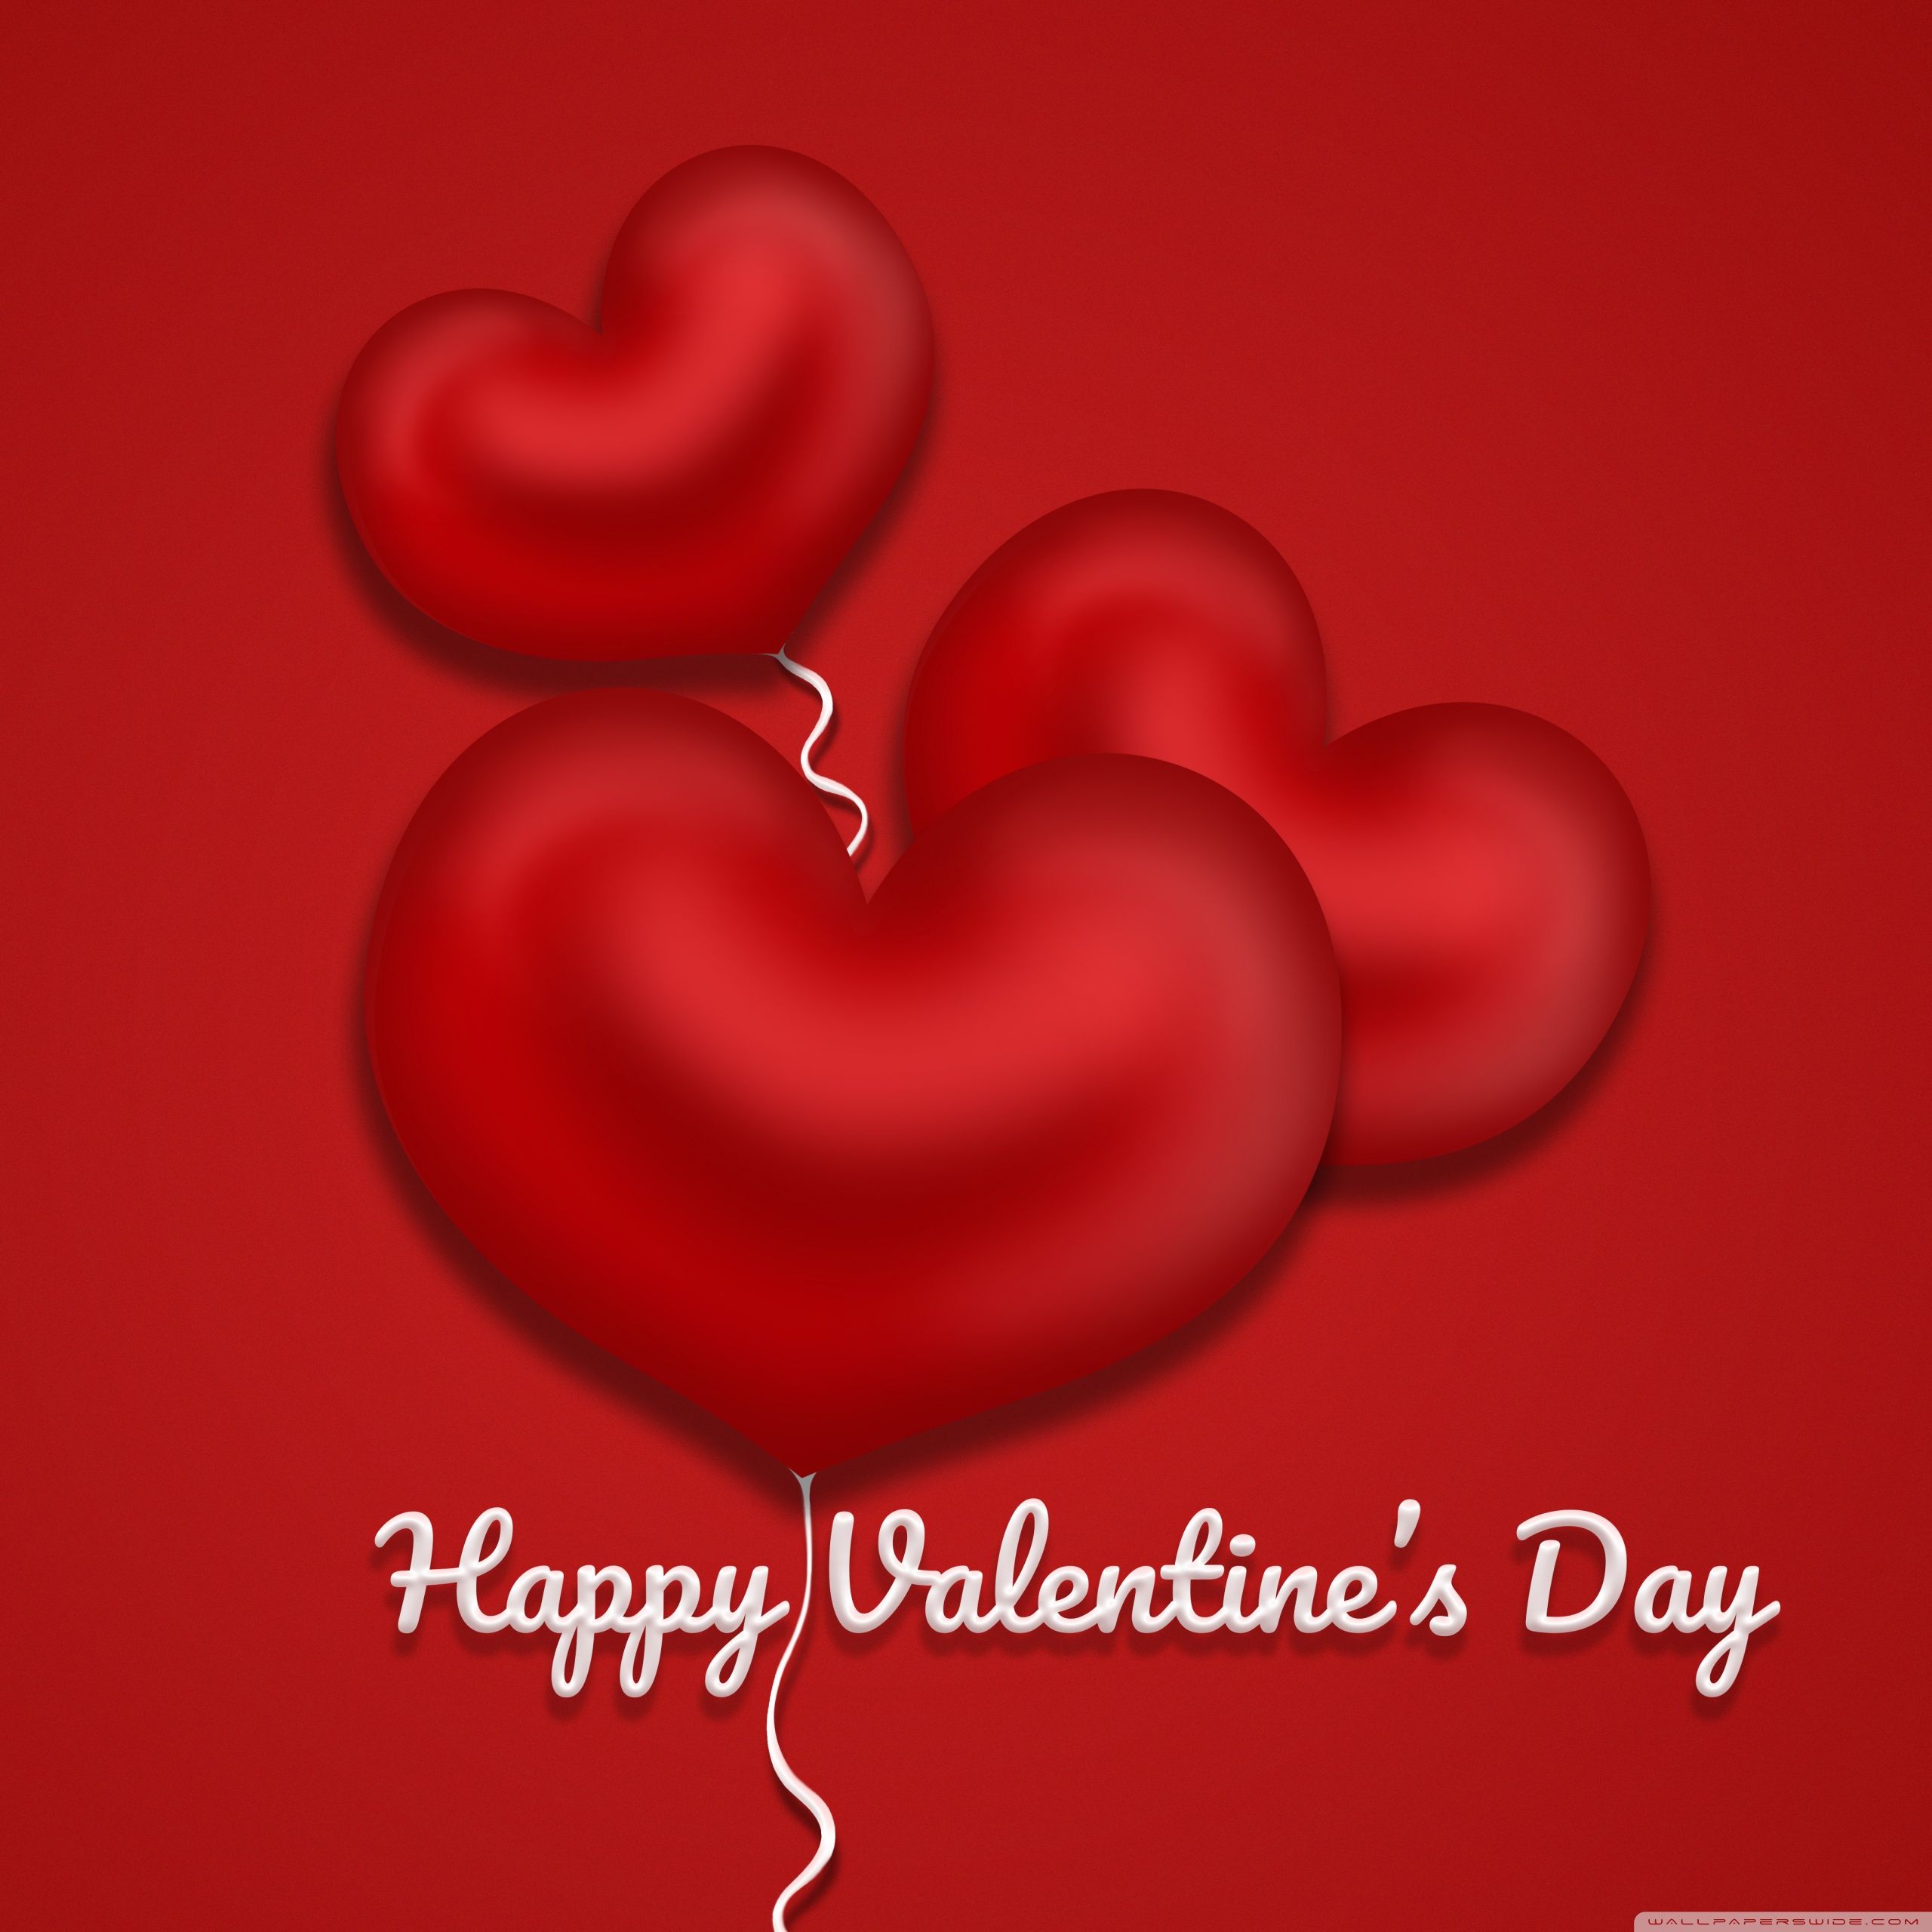 Happy Valentines Day 2020 Ultra HD .wallpaperwide.com